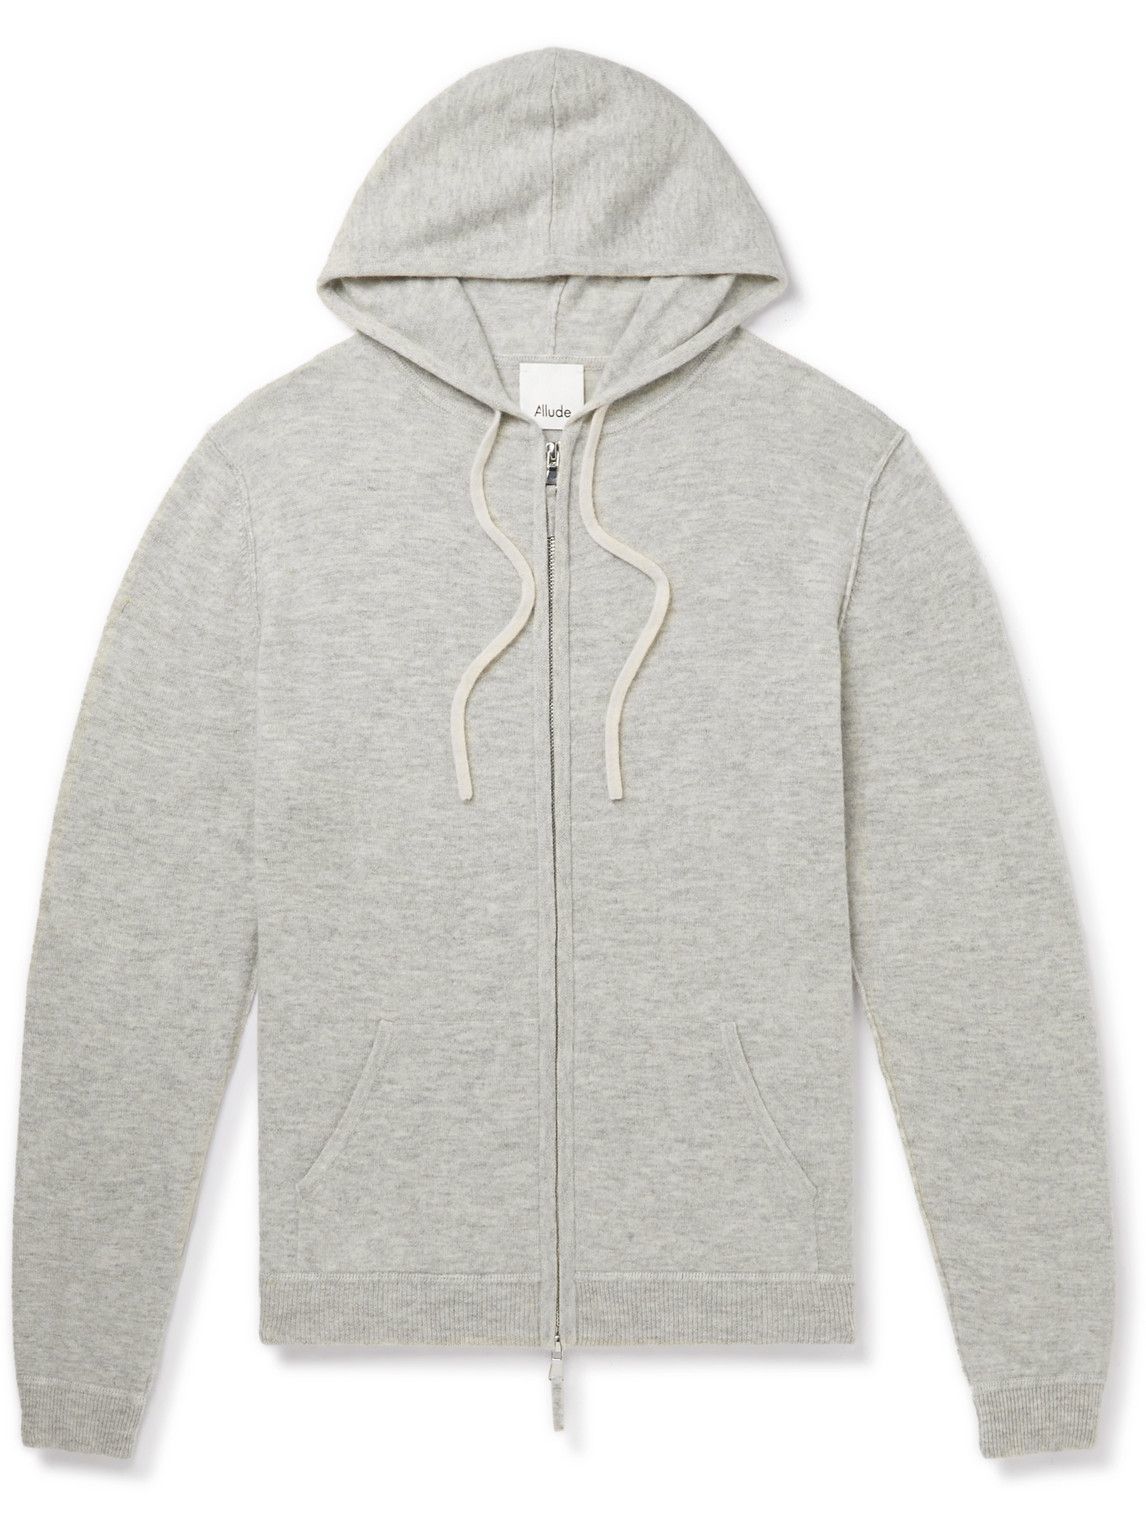 Photo: Allude - Virgin Wool and Cashmere Blend Zip-Up Hoodie - Gray